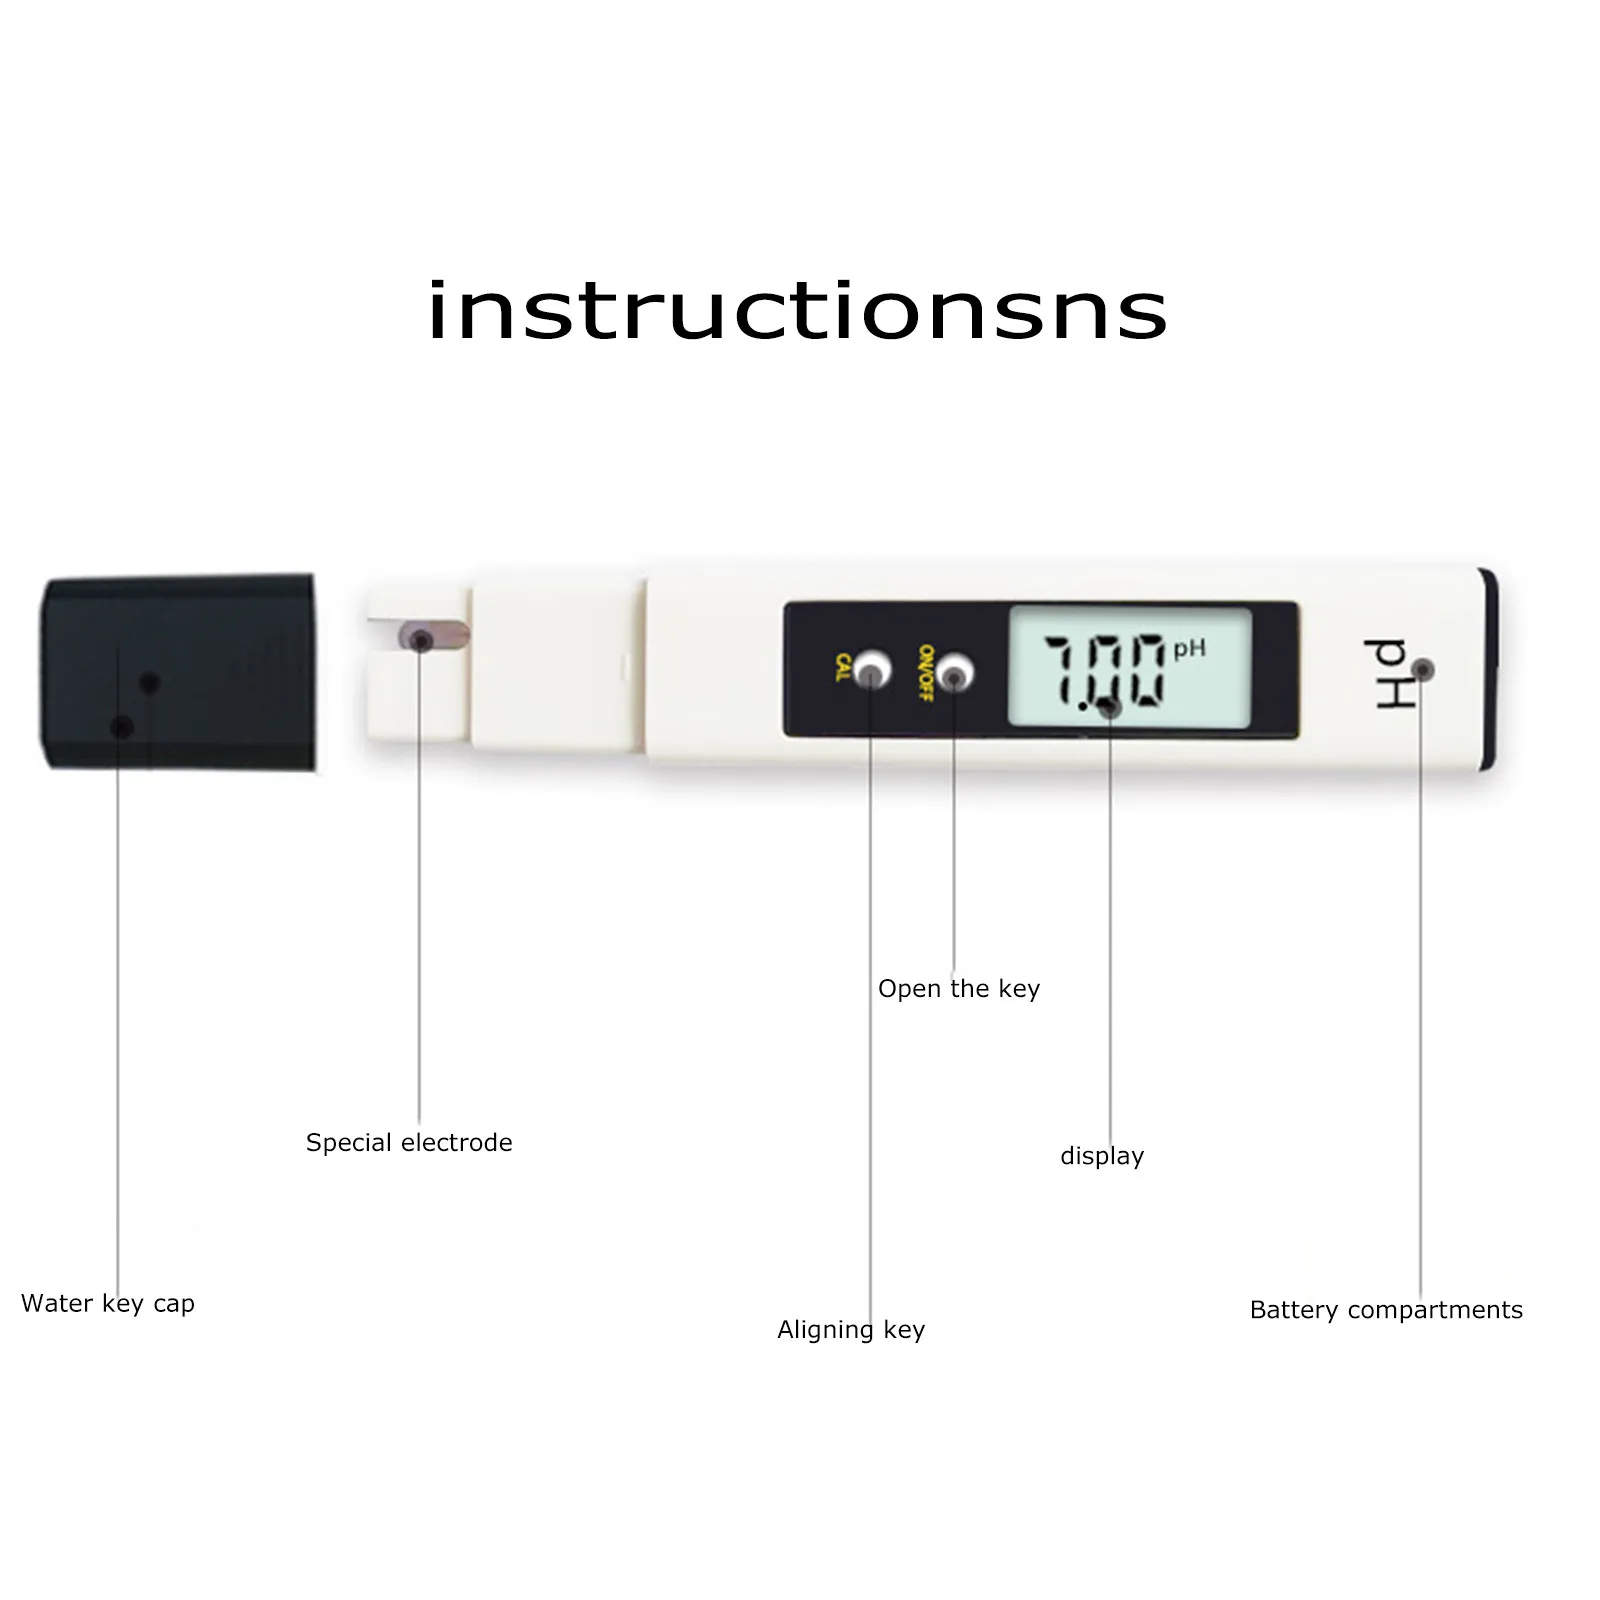 Digital PH Meter Tester Thermometer Measuring Pen Water Quality Filter Hydroponic for Aquarium Pool Monitor #41 | Дом и сад